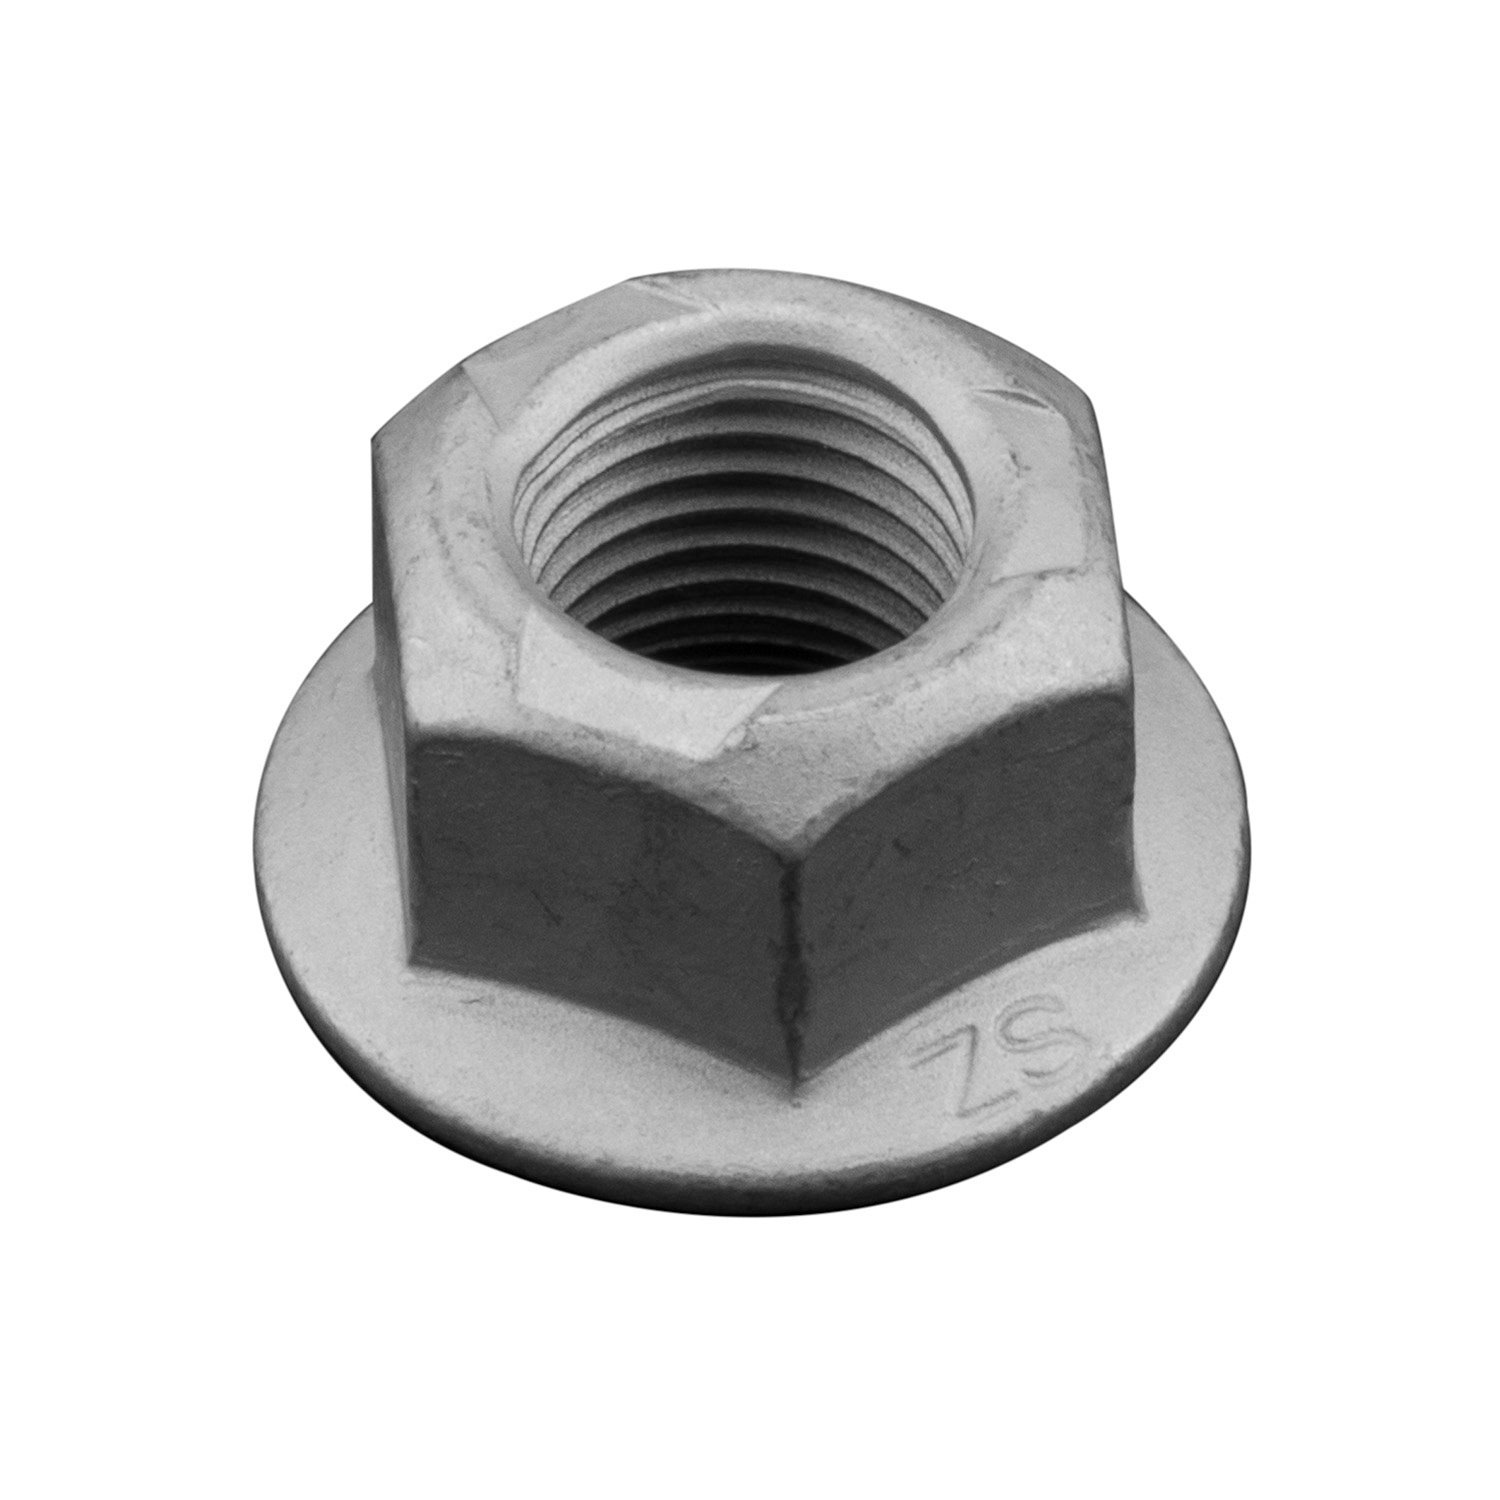 Track Bar Nut, 14mm x 1.50 for Select